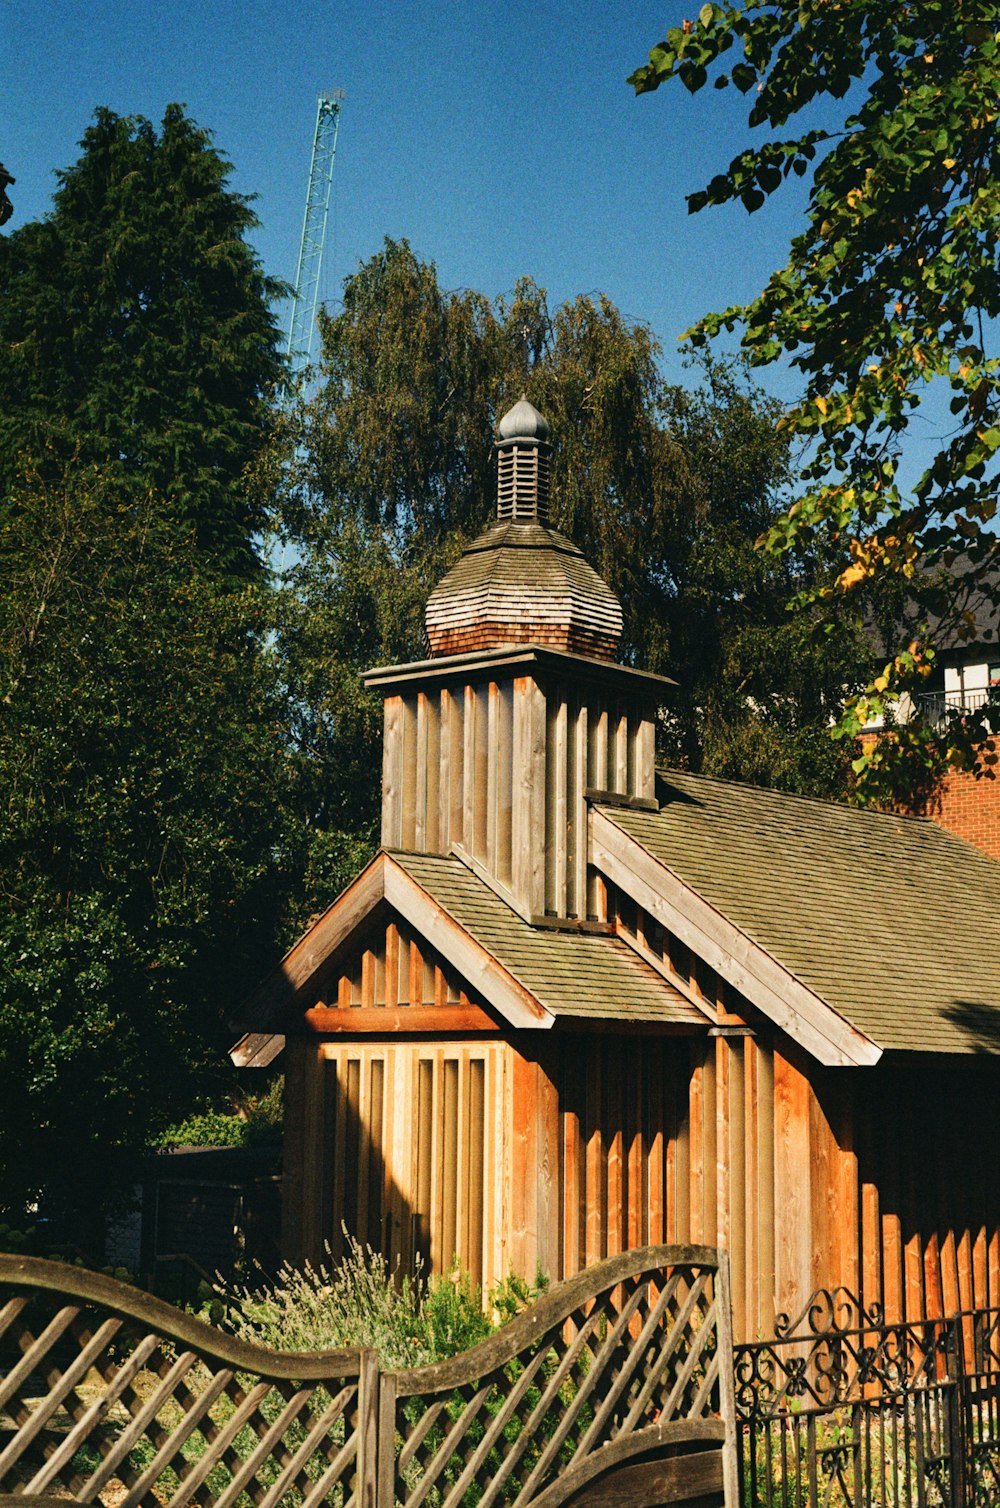 a wooden building with a steeple on top of it